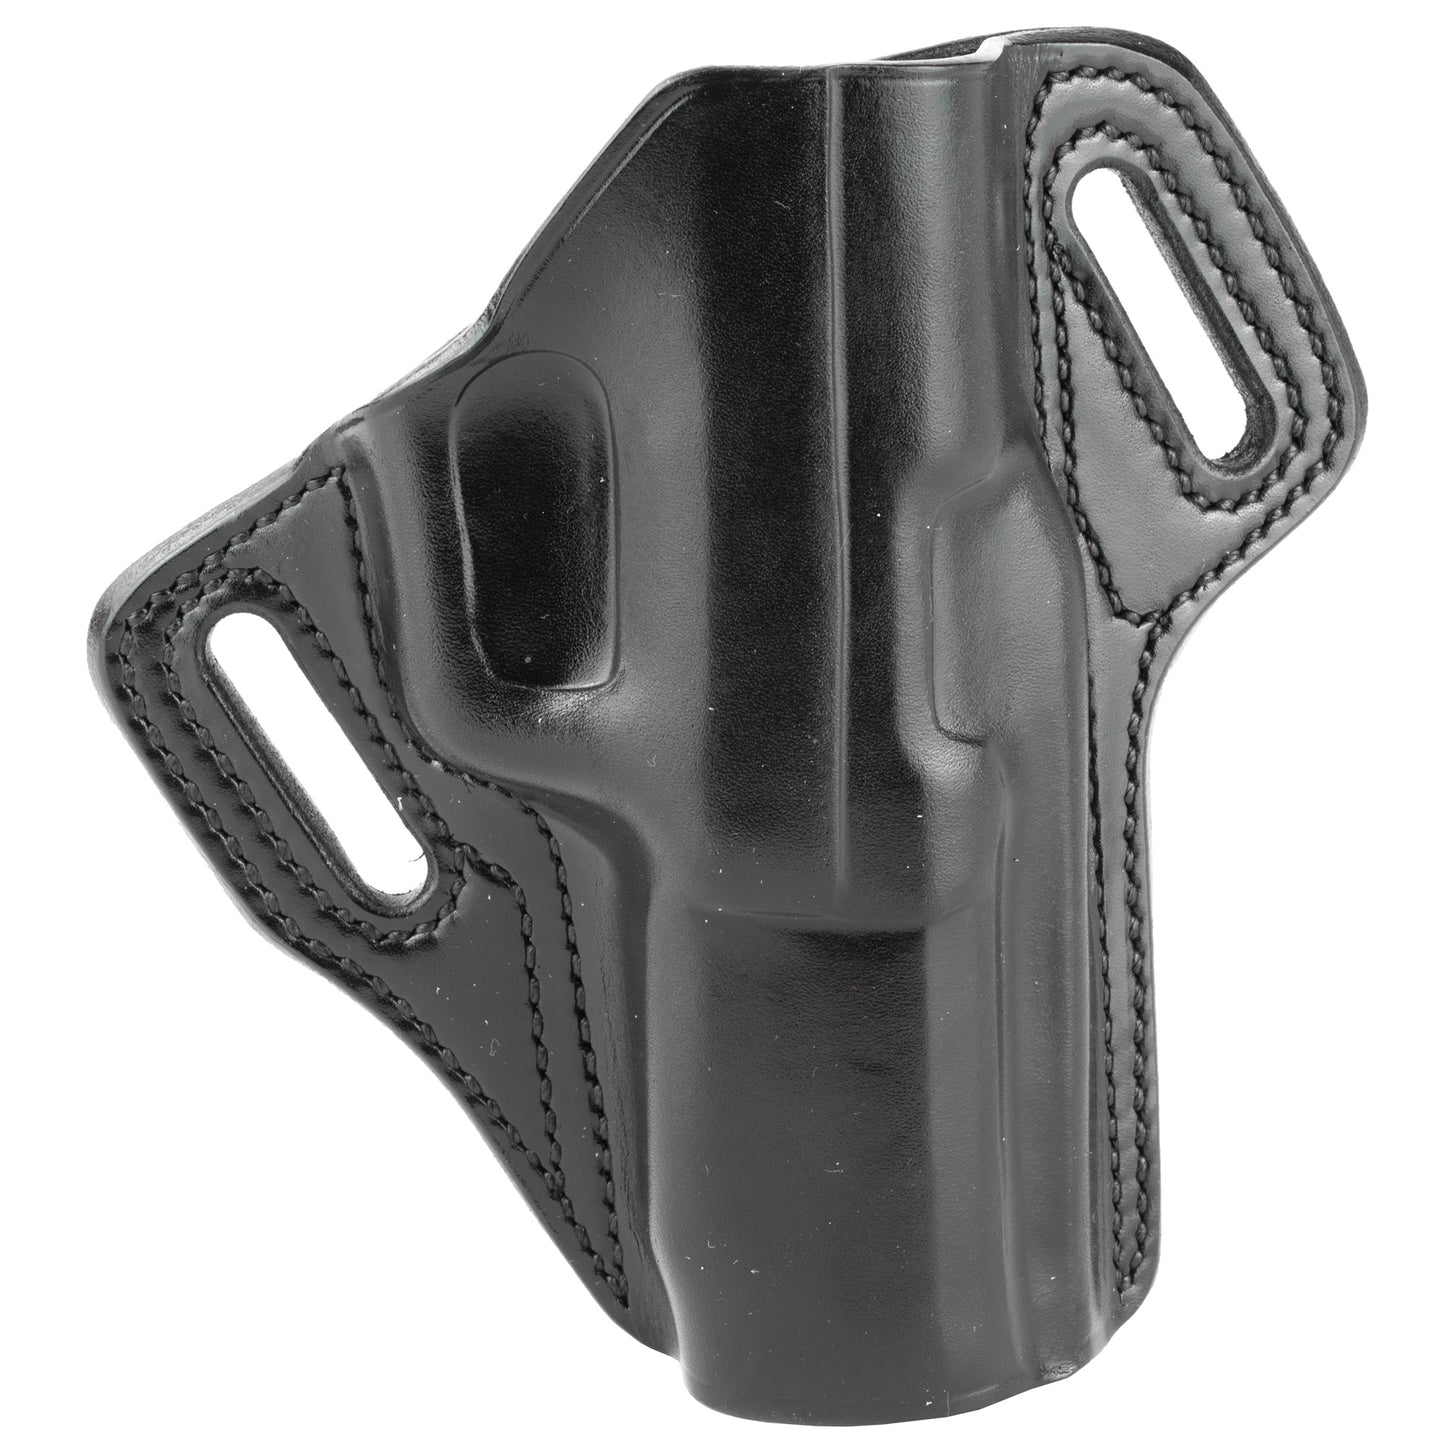 Galco Concealable Belt Holster Fits FN Five-seveN, USG & MK2 Leather  CON458B